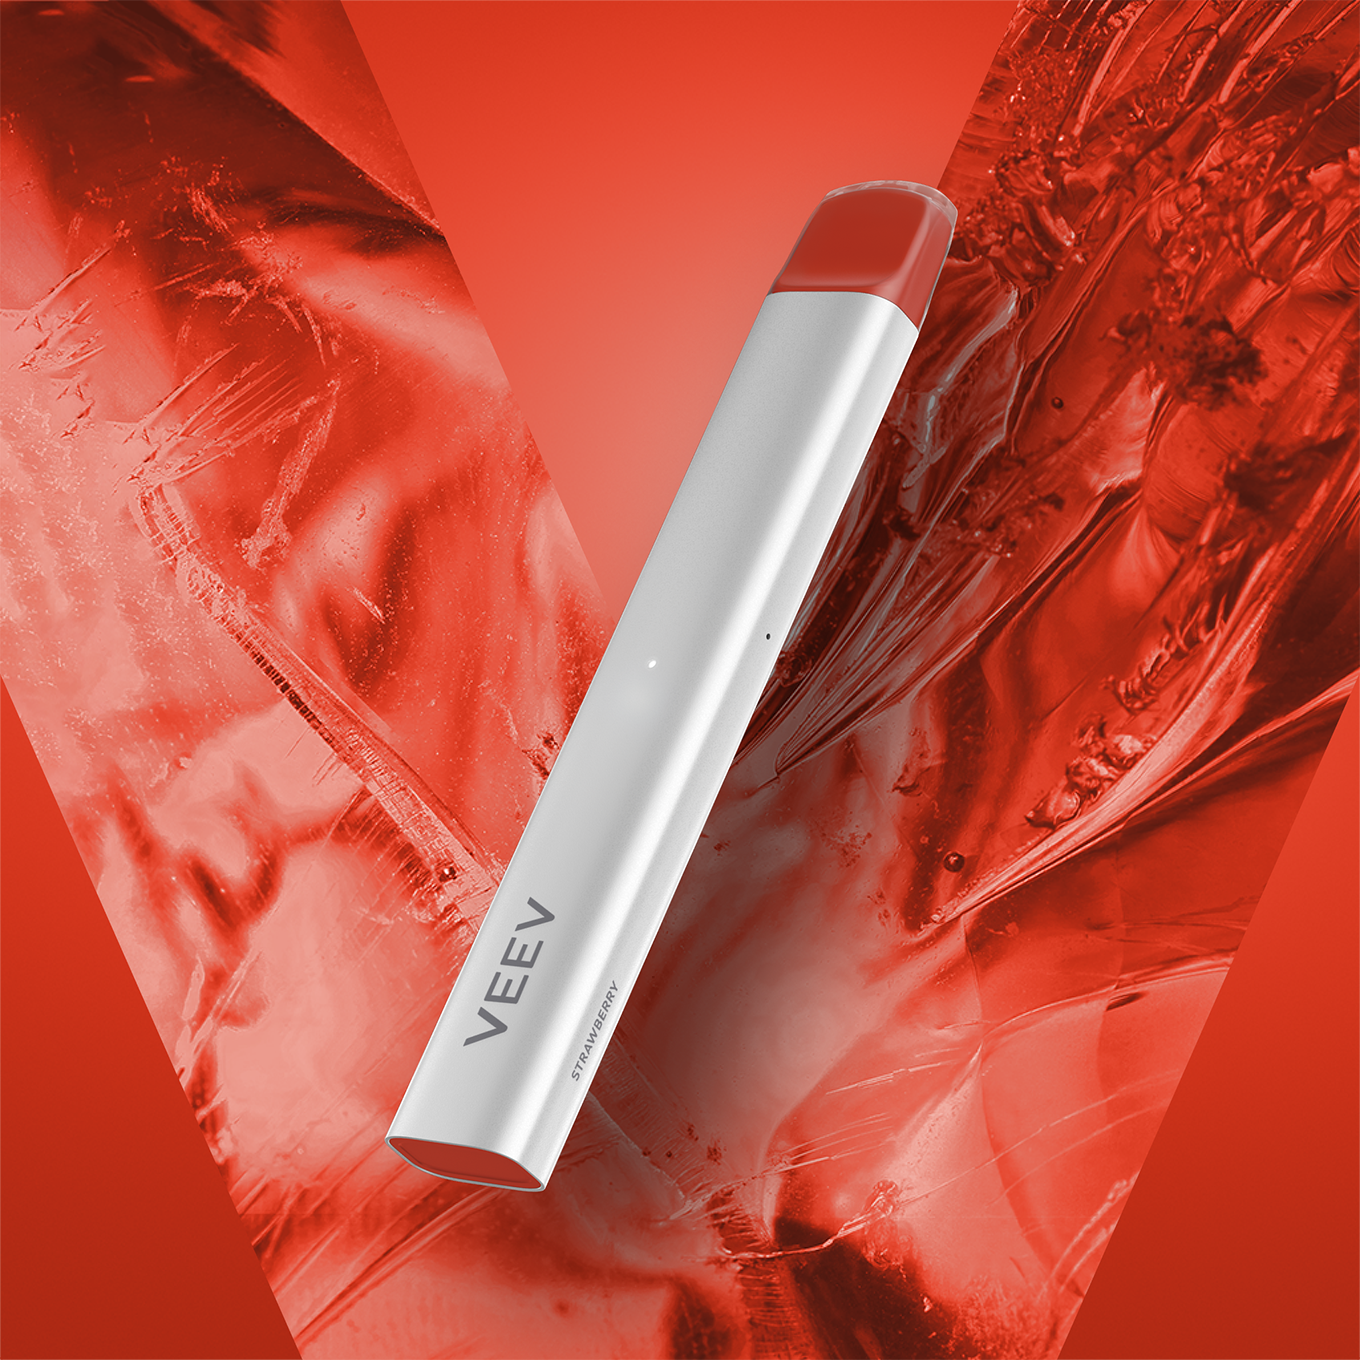 VEEV NOW Strawberry disposable vape